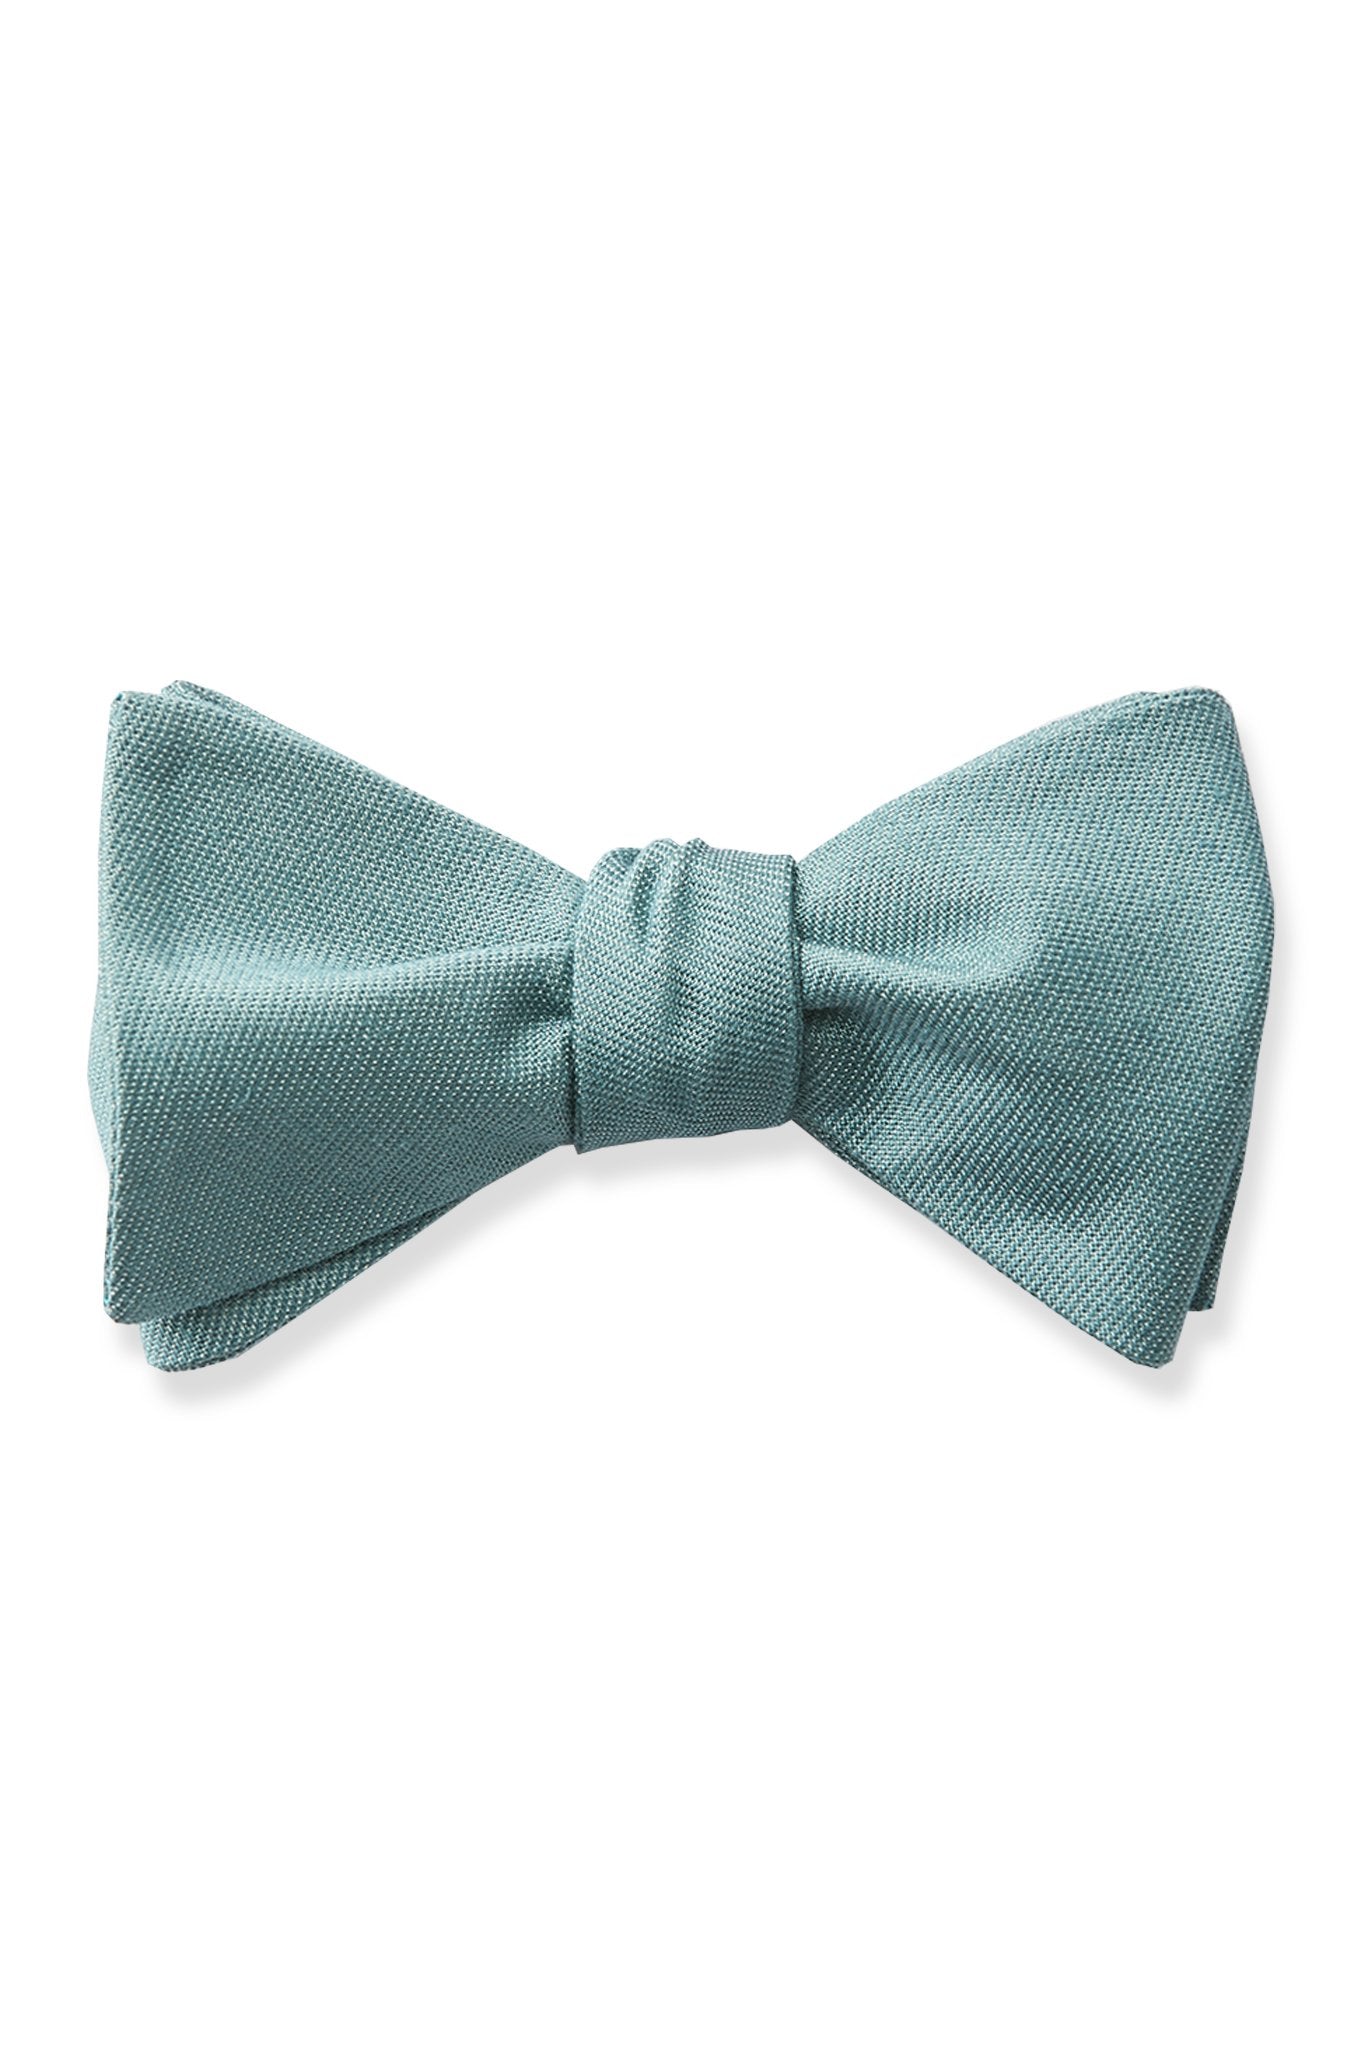 Daniel Bow Tie in sea glass by Birdy Grey, front view